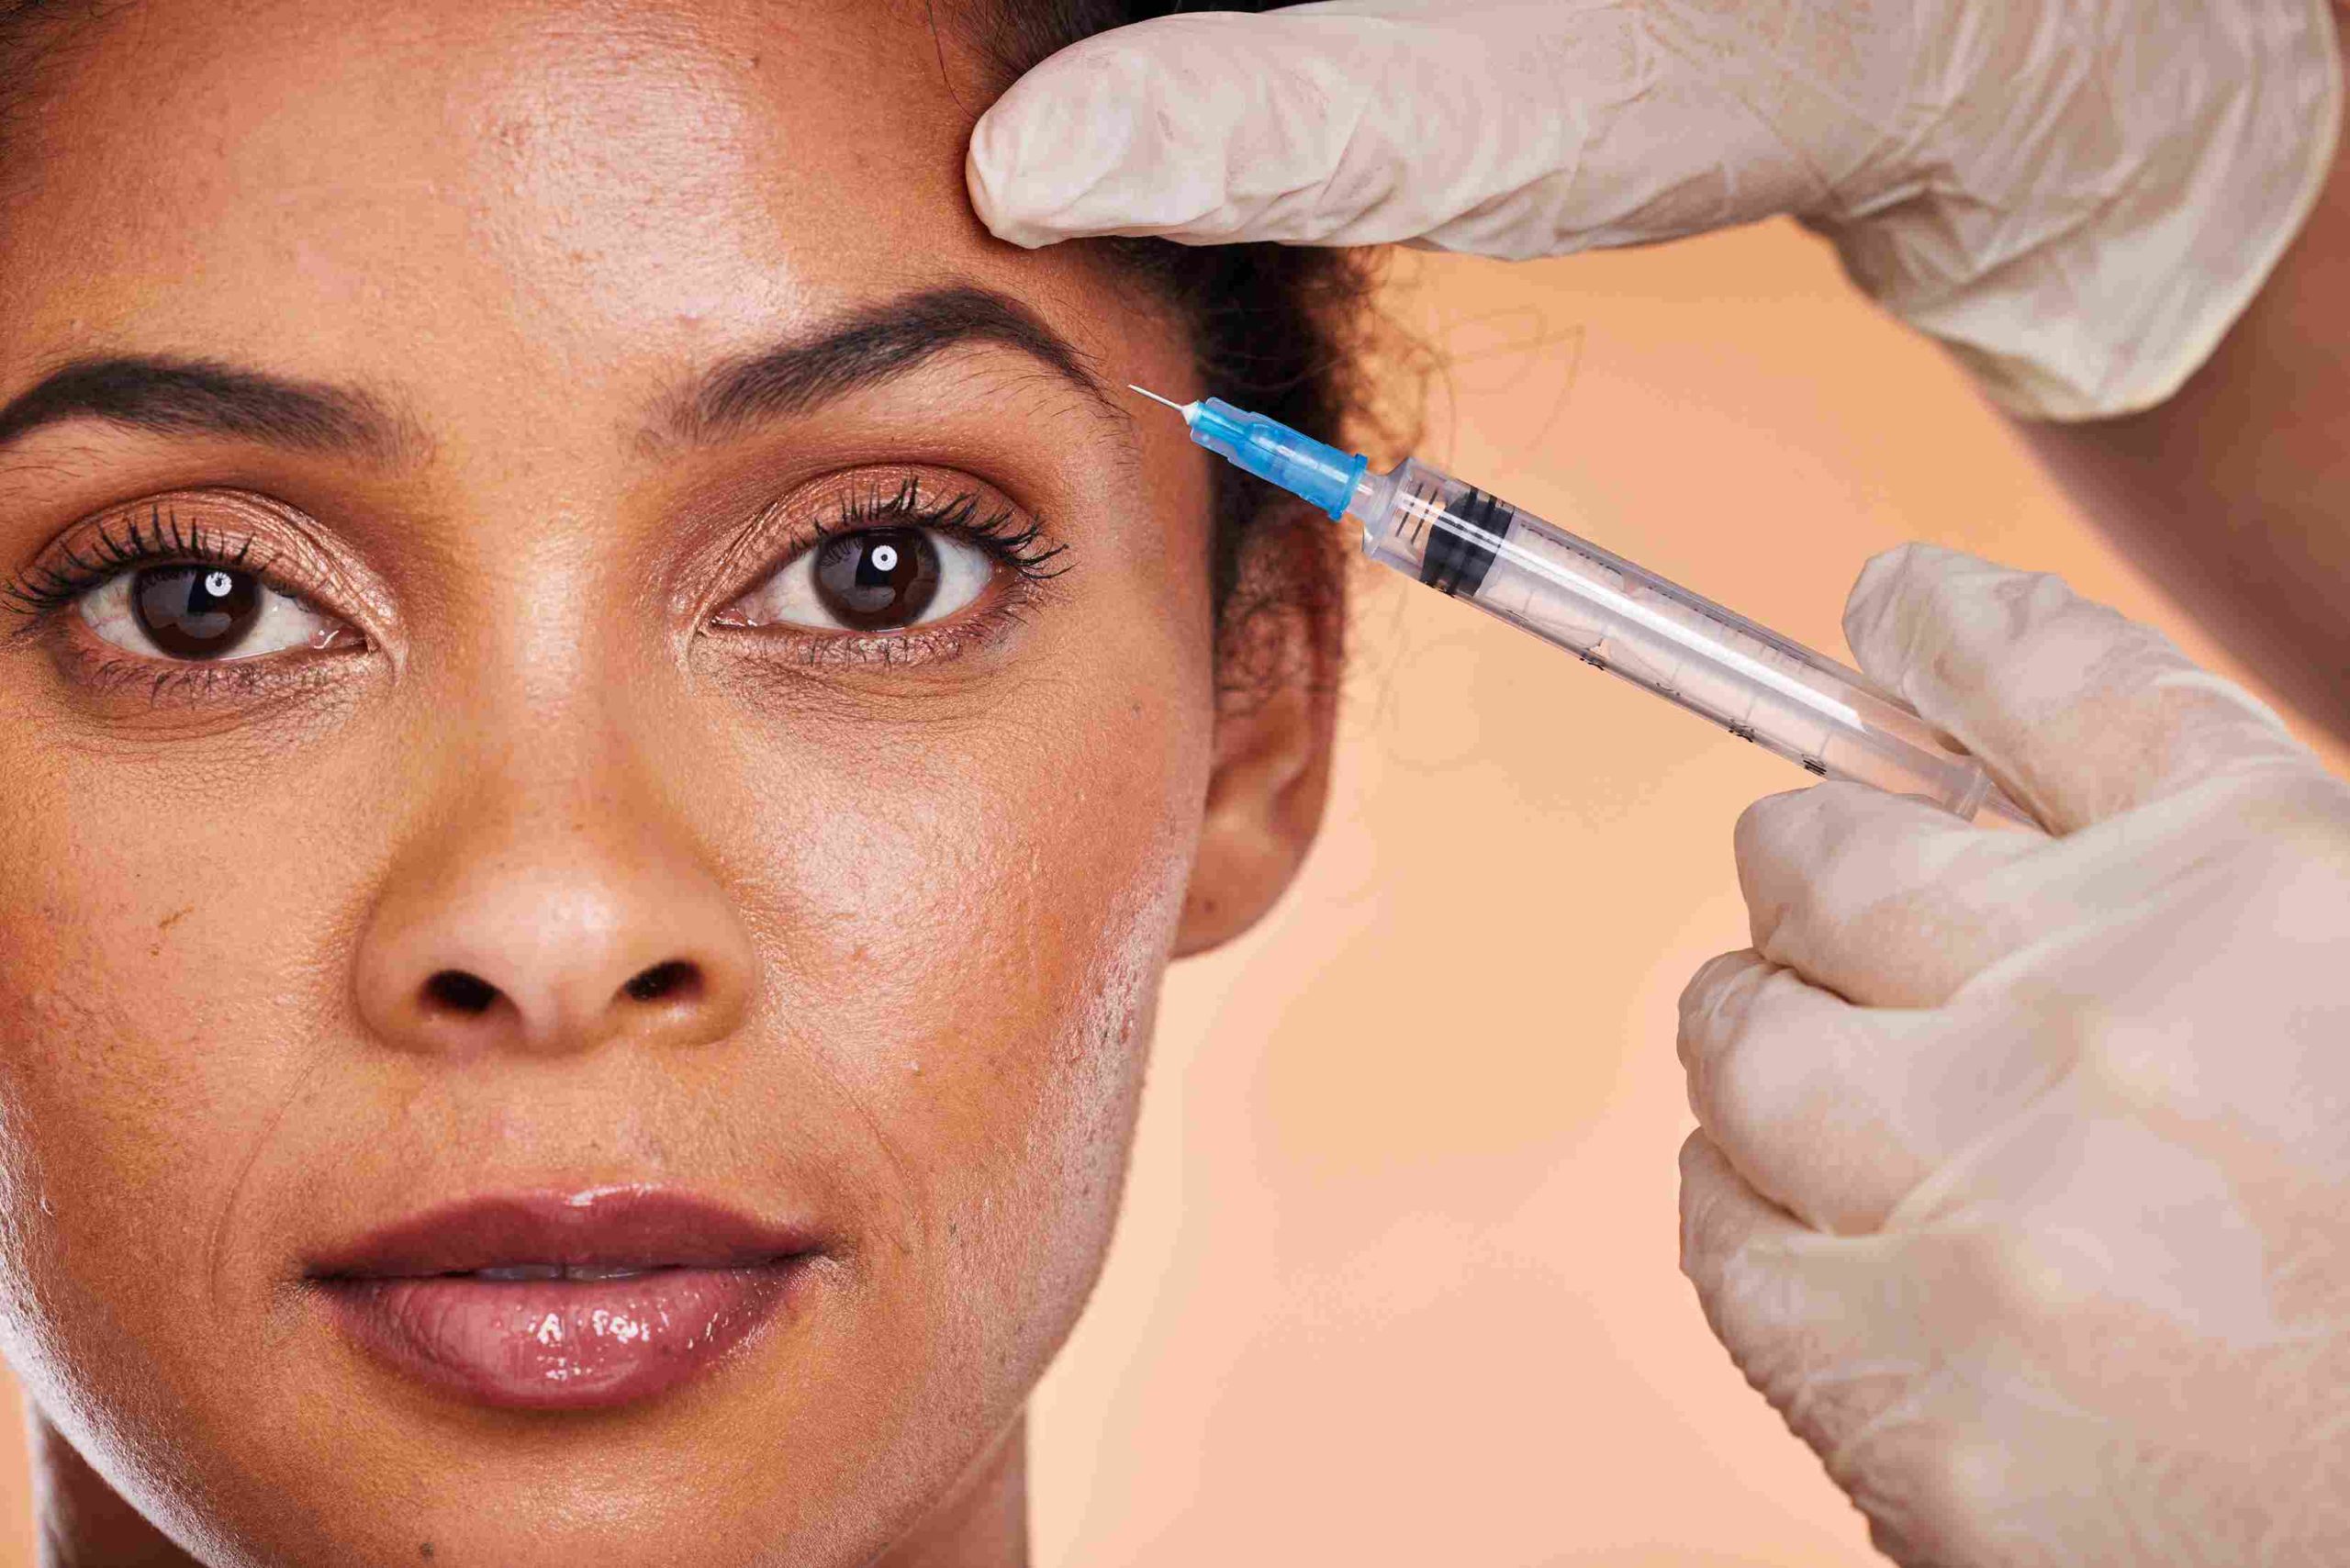 Woman Receiving Restylane Filler Injection | Avail Aesthetics in Cary, NC